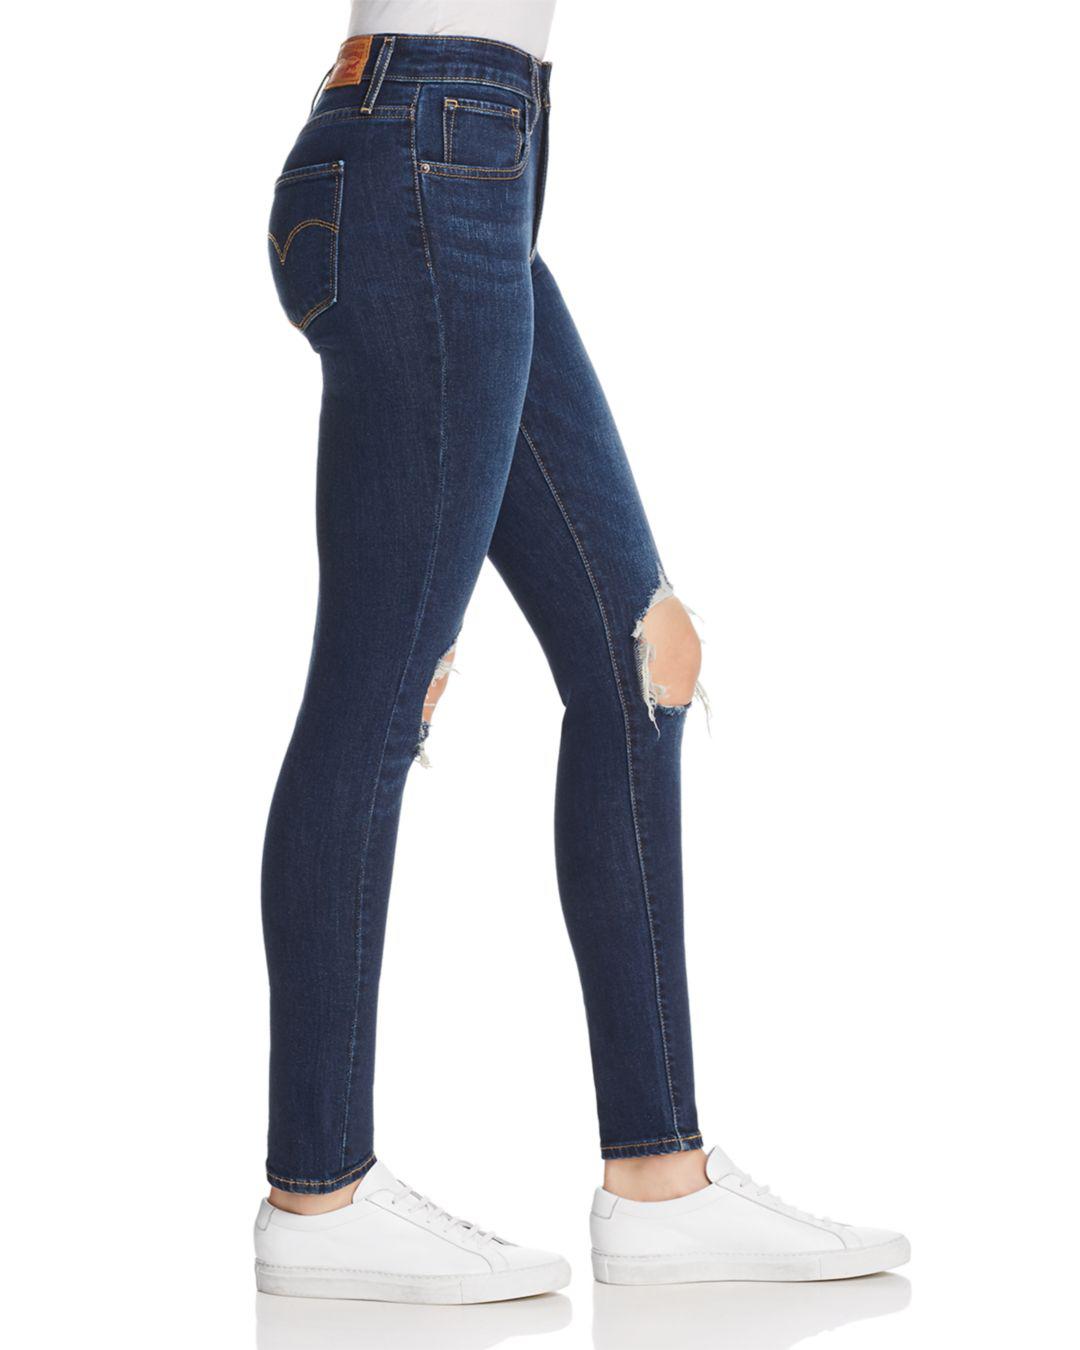 levi's 721 high rise skinny rough day